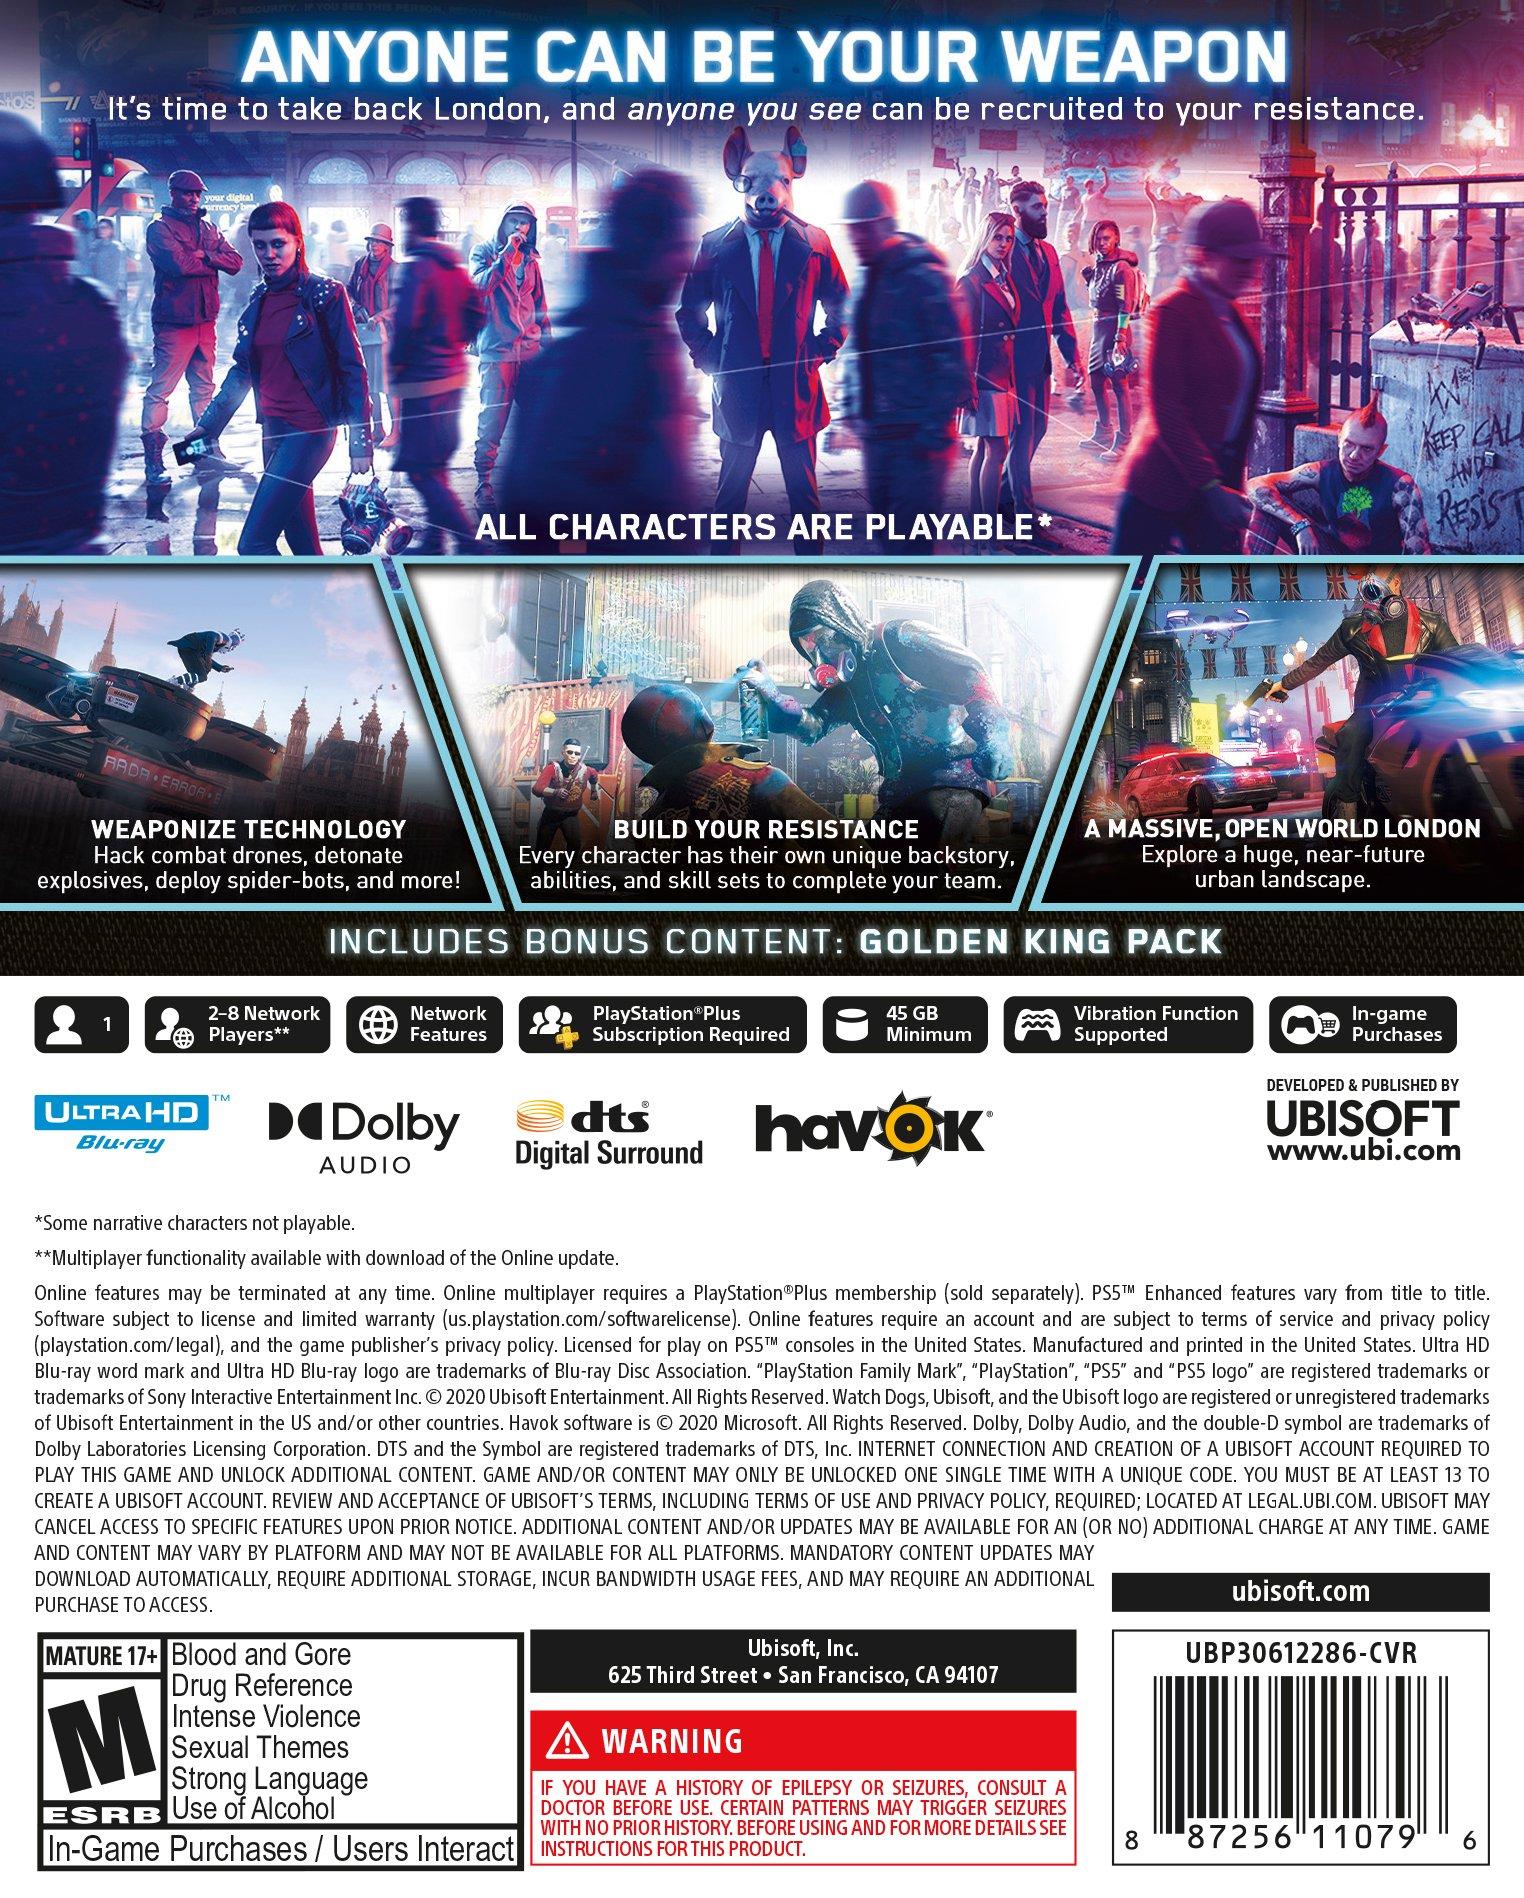 Watch Dogs®: Legion PS4 & PS5